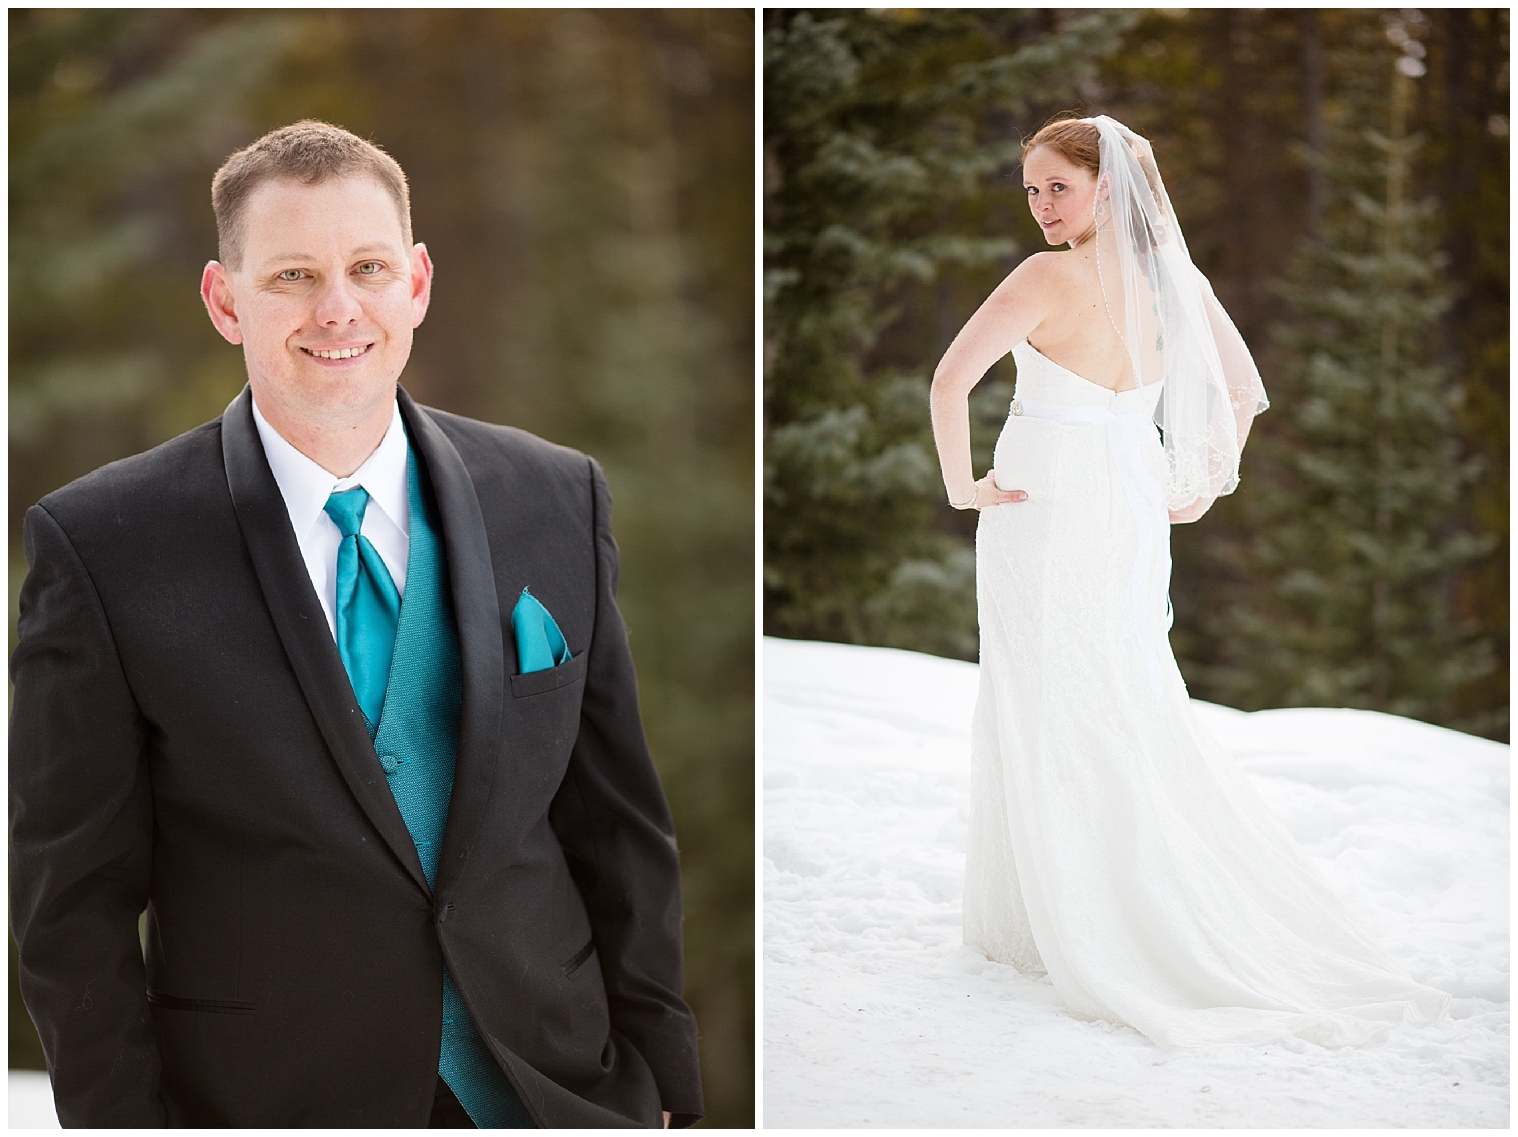 Individual portraits of a bride and groom at their Colorado winter elopement.